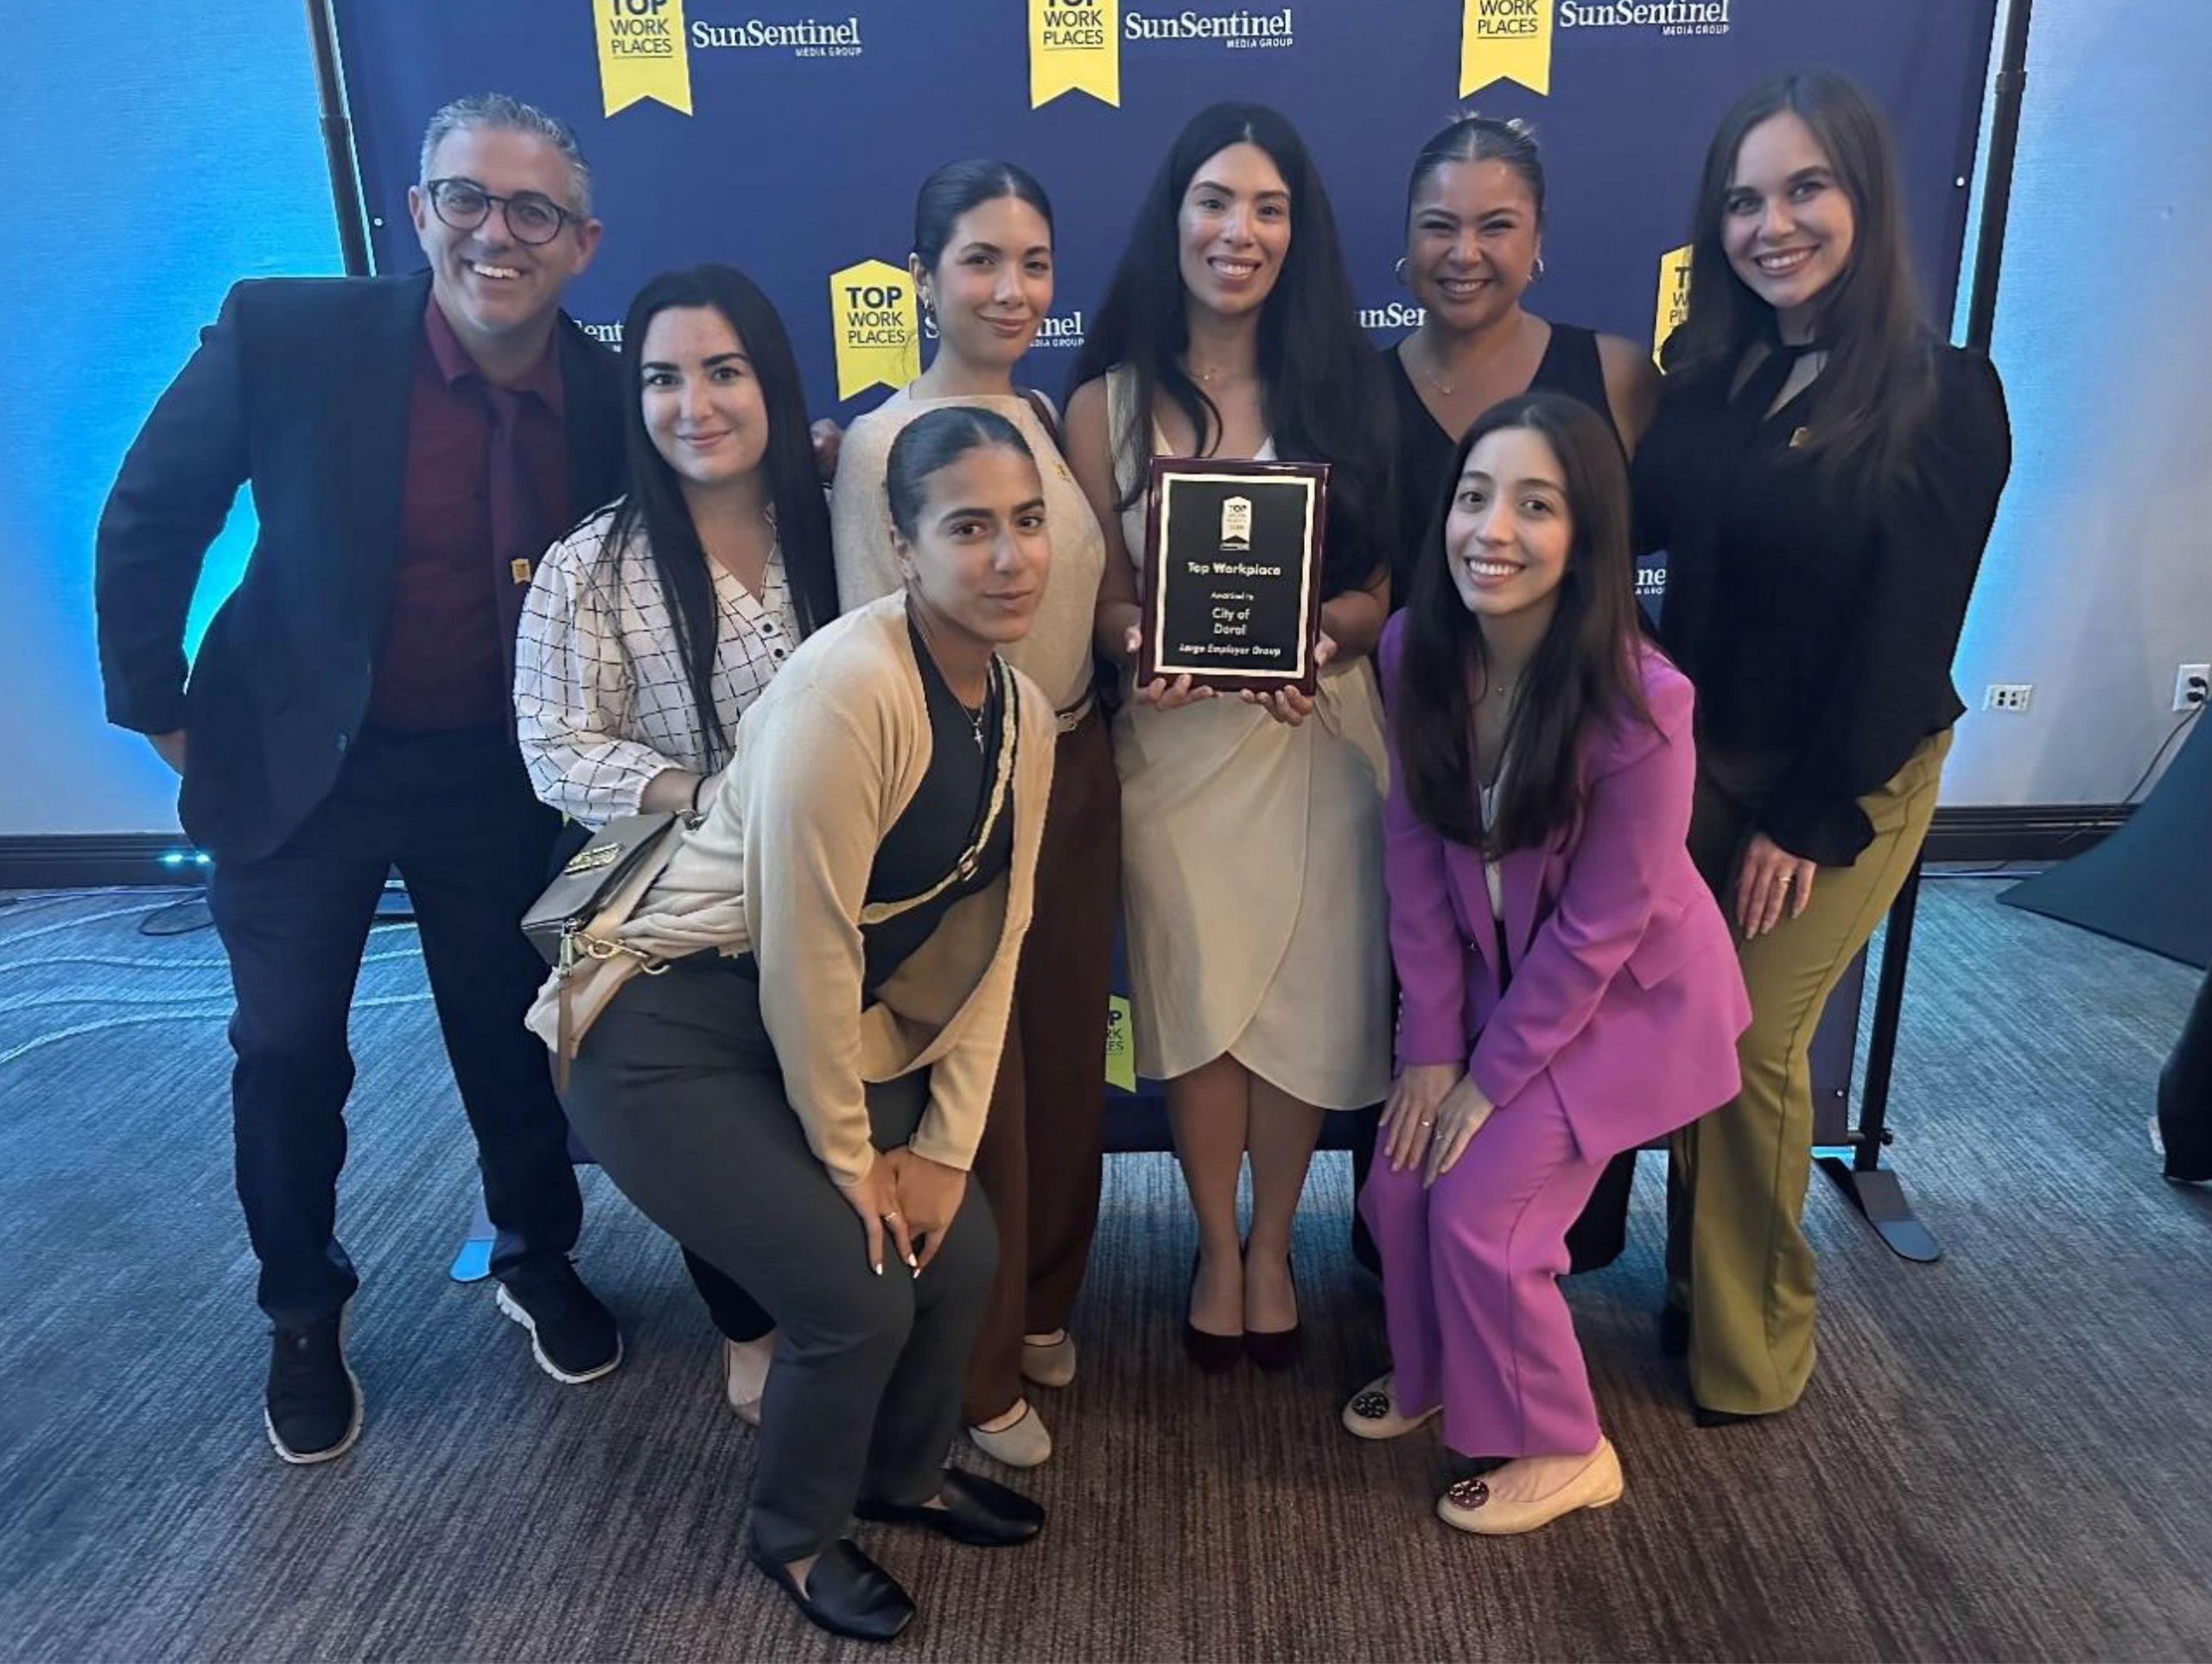 City of Doral Recognized as a Top Workplace in South Florida